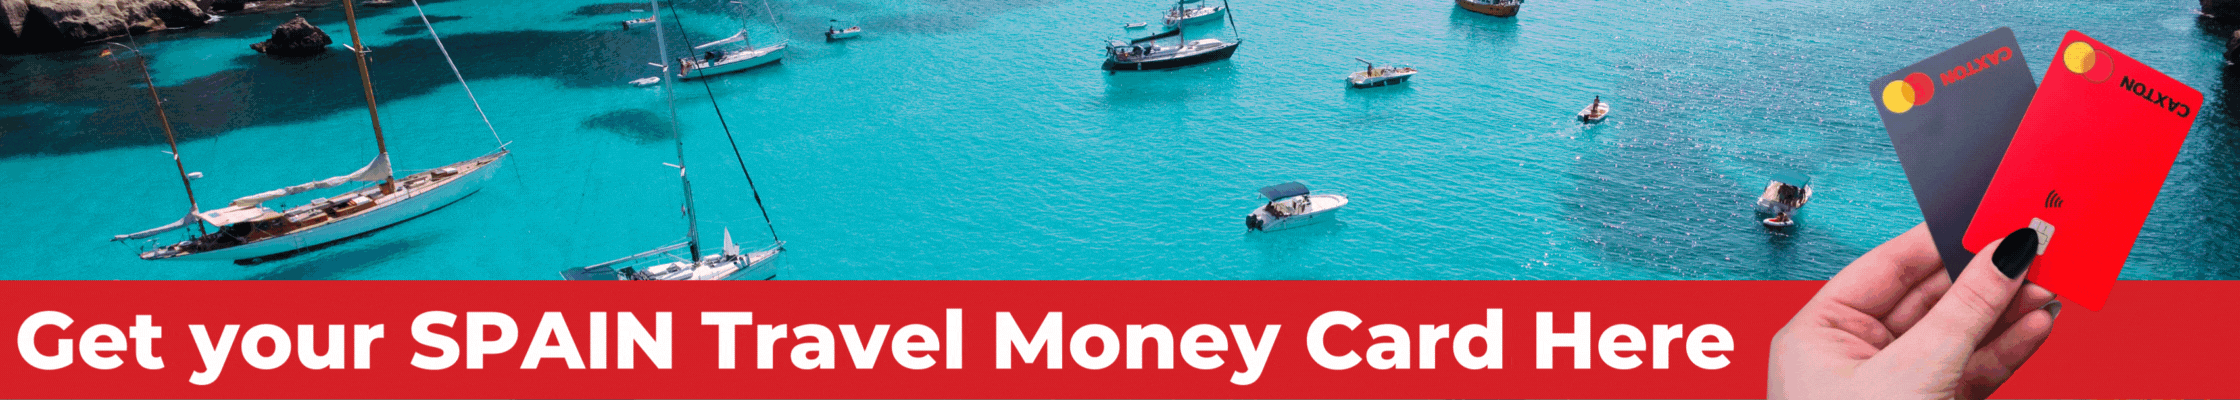 Get your SPAIN Travel Money Card.gif